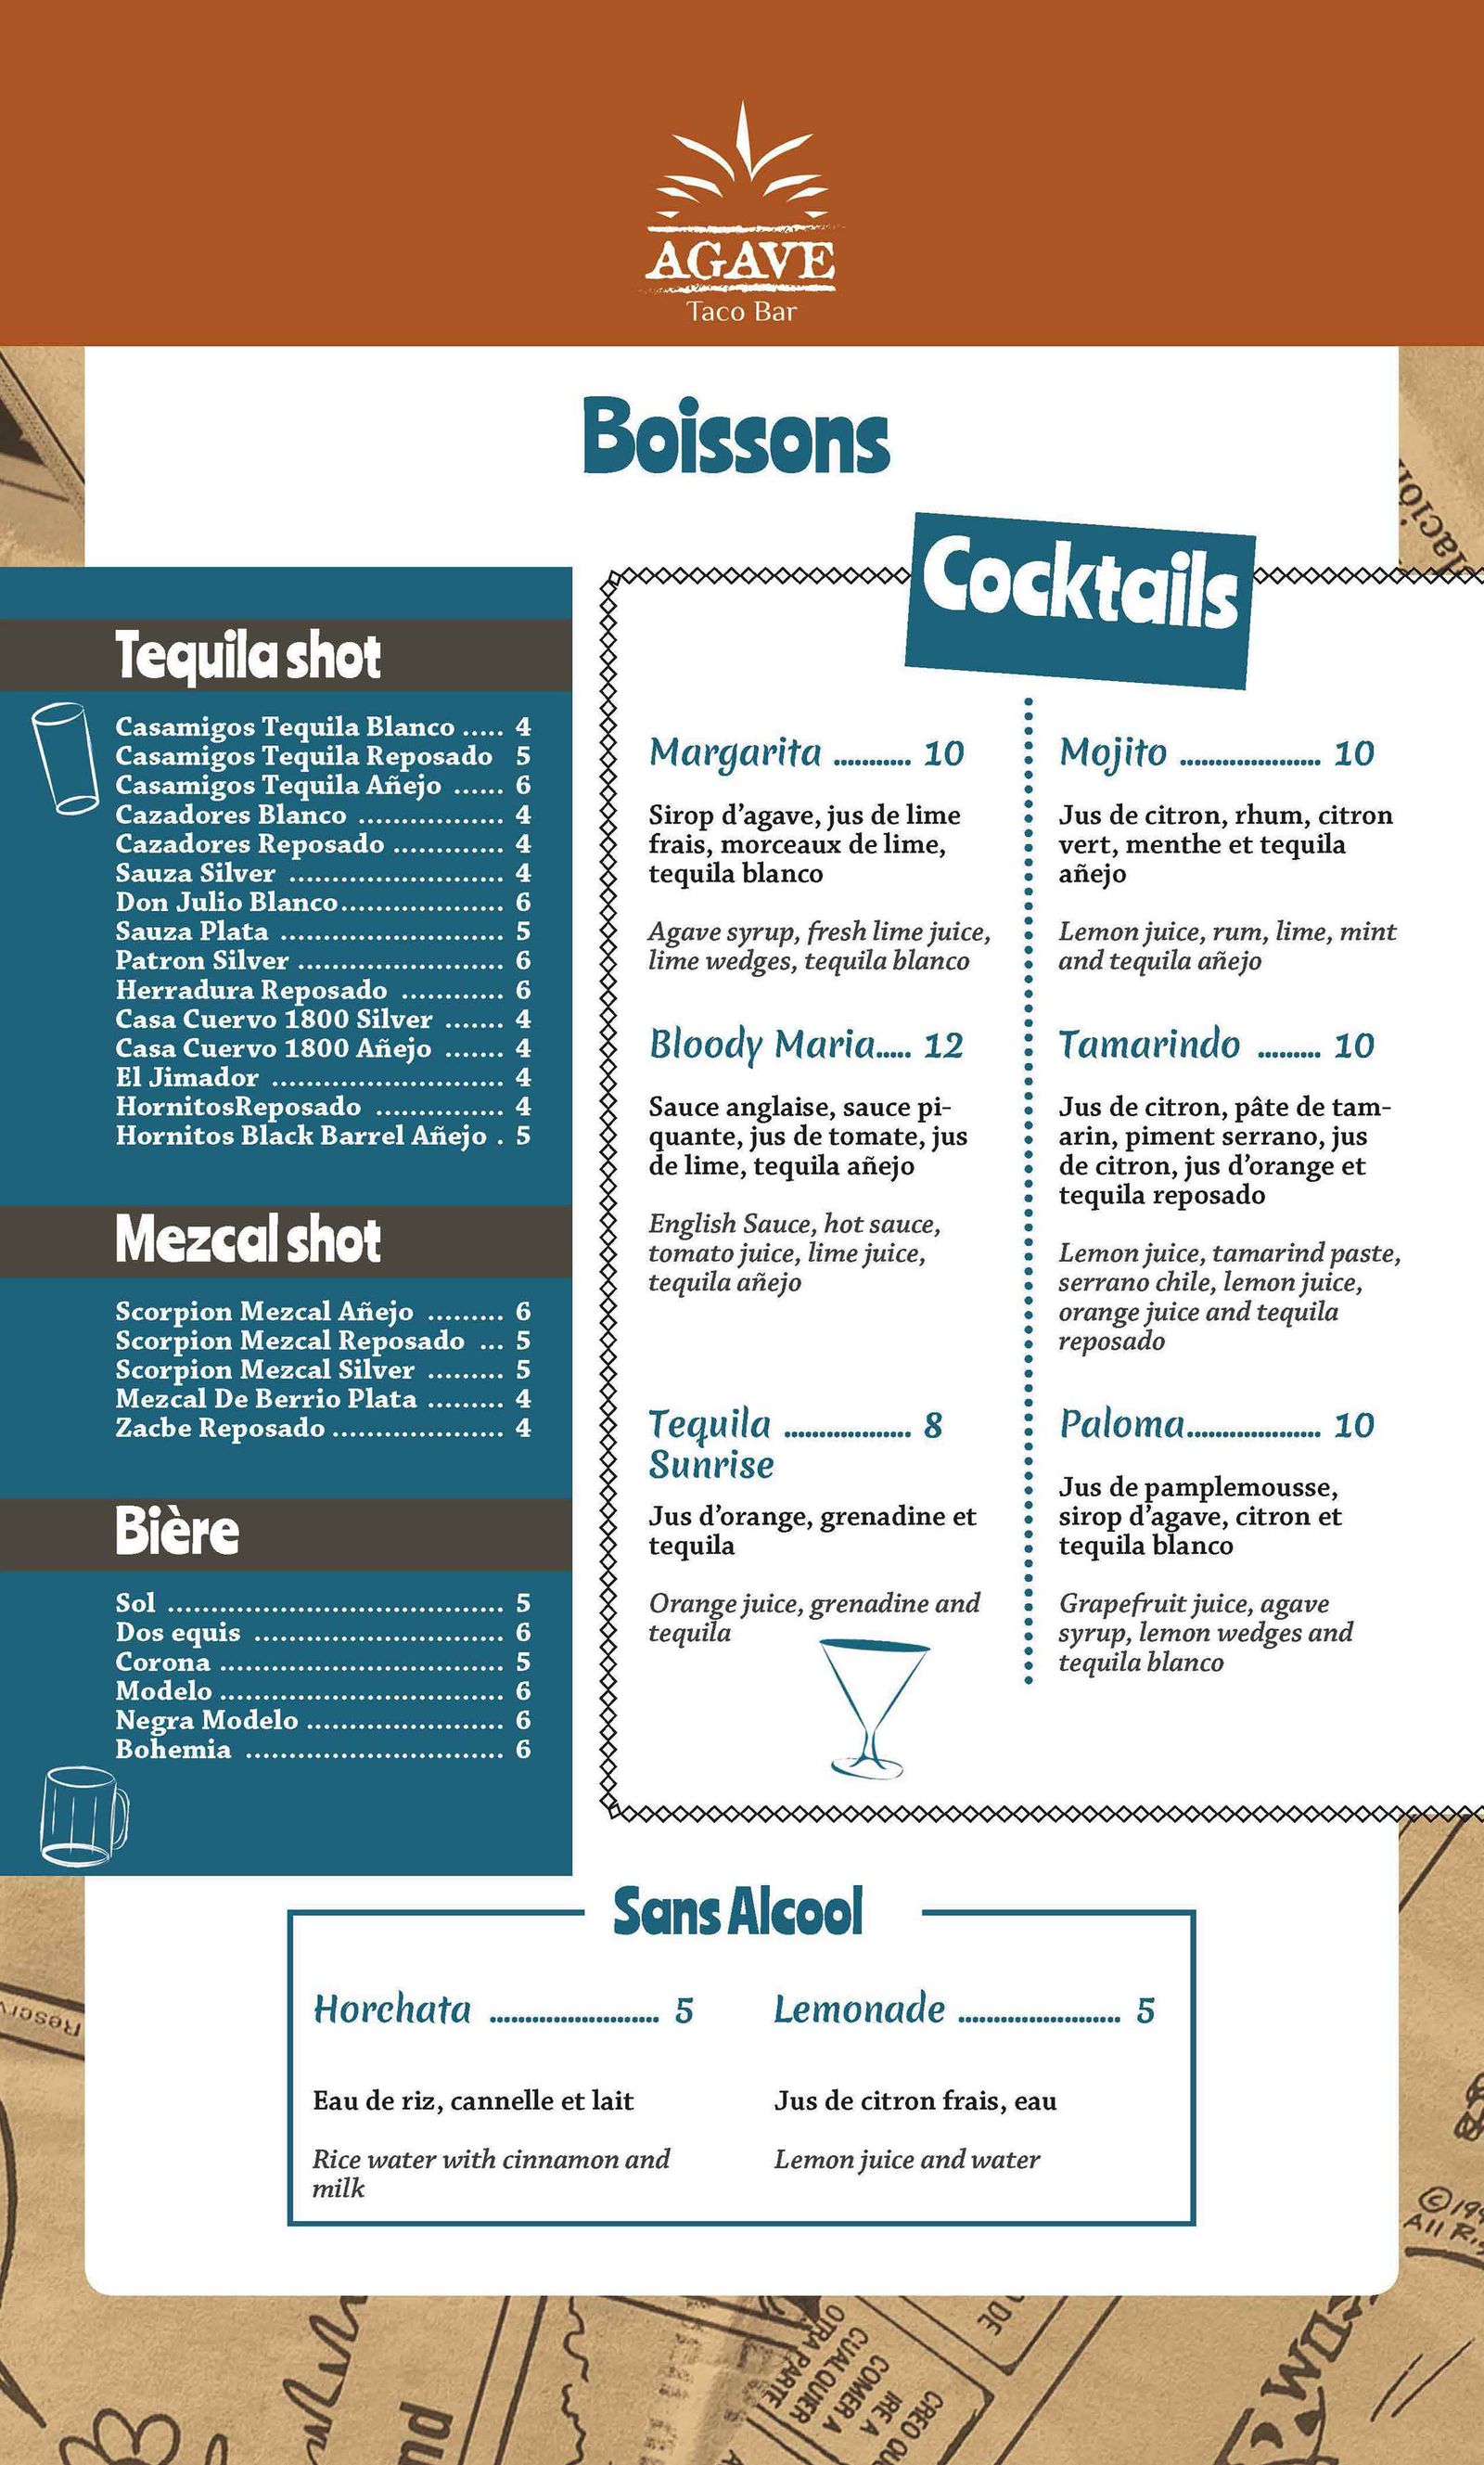 Agave Menu fouth page